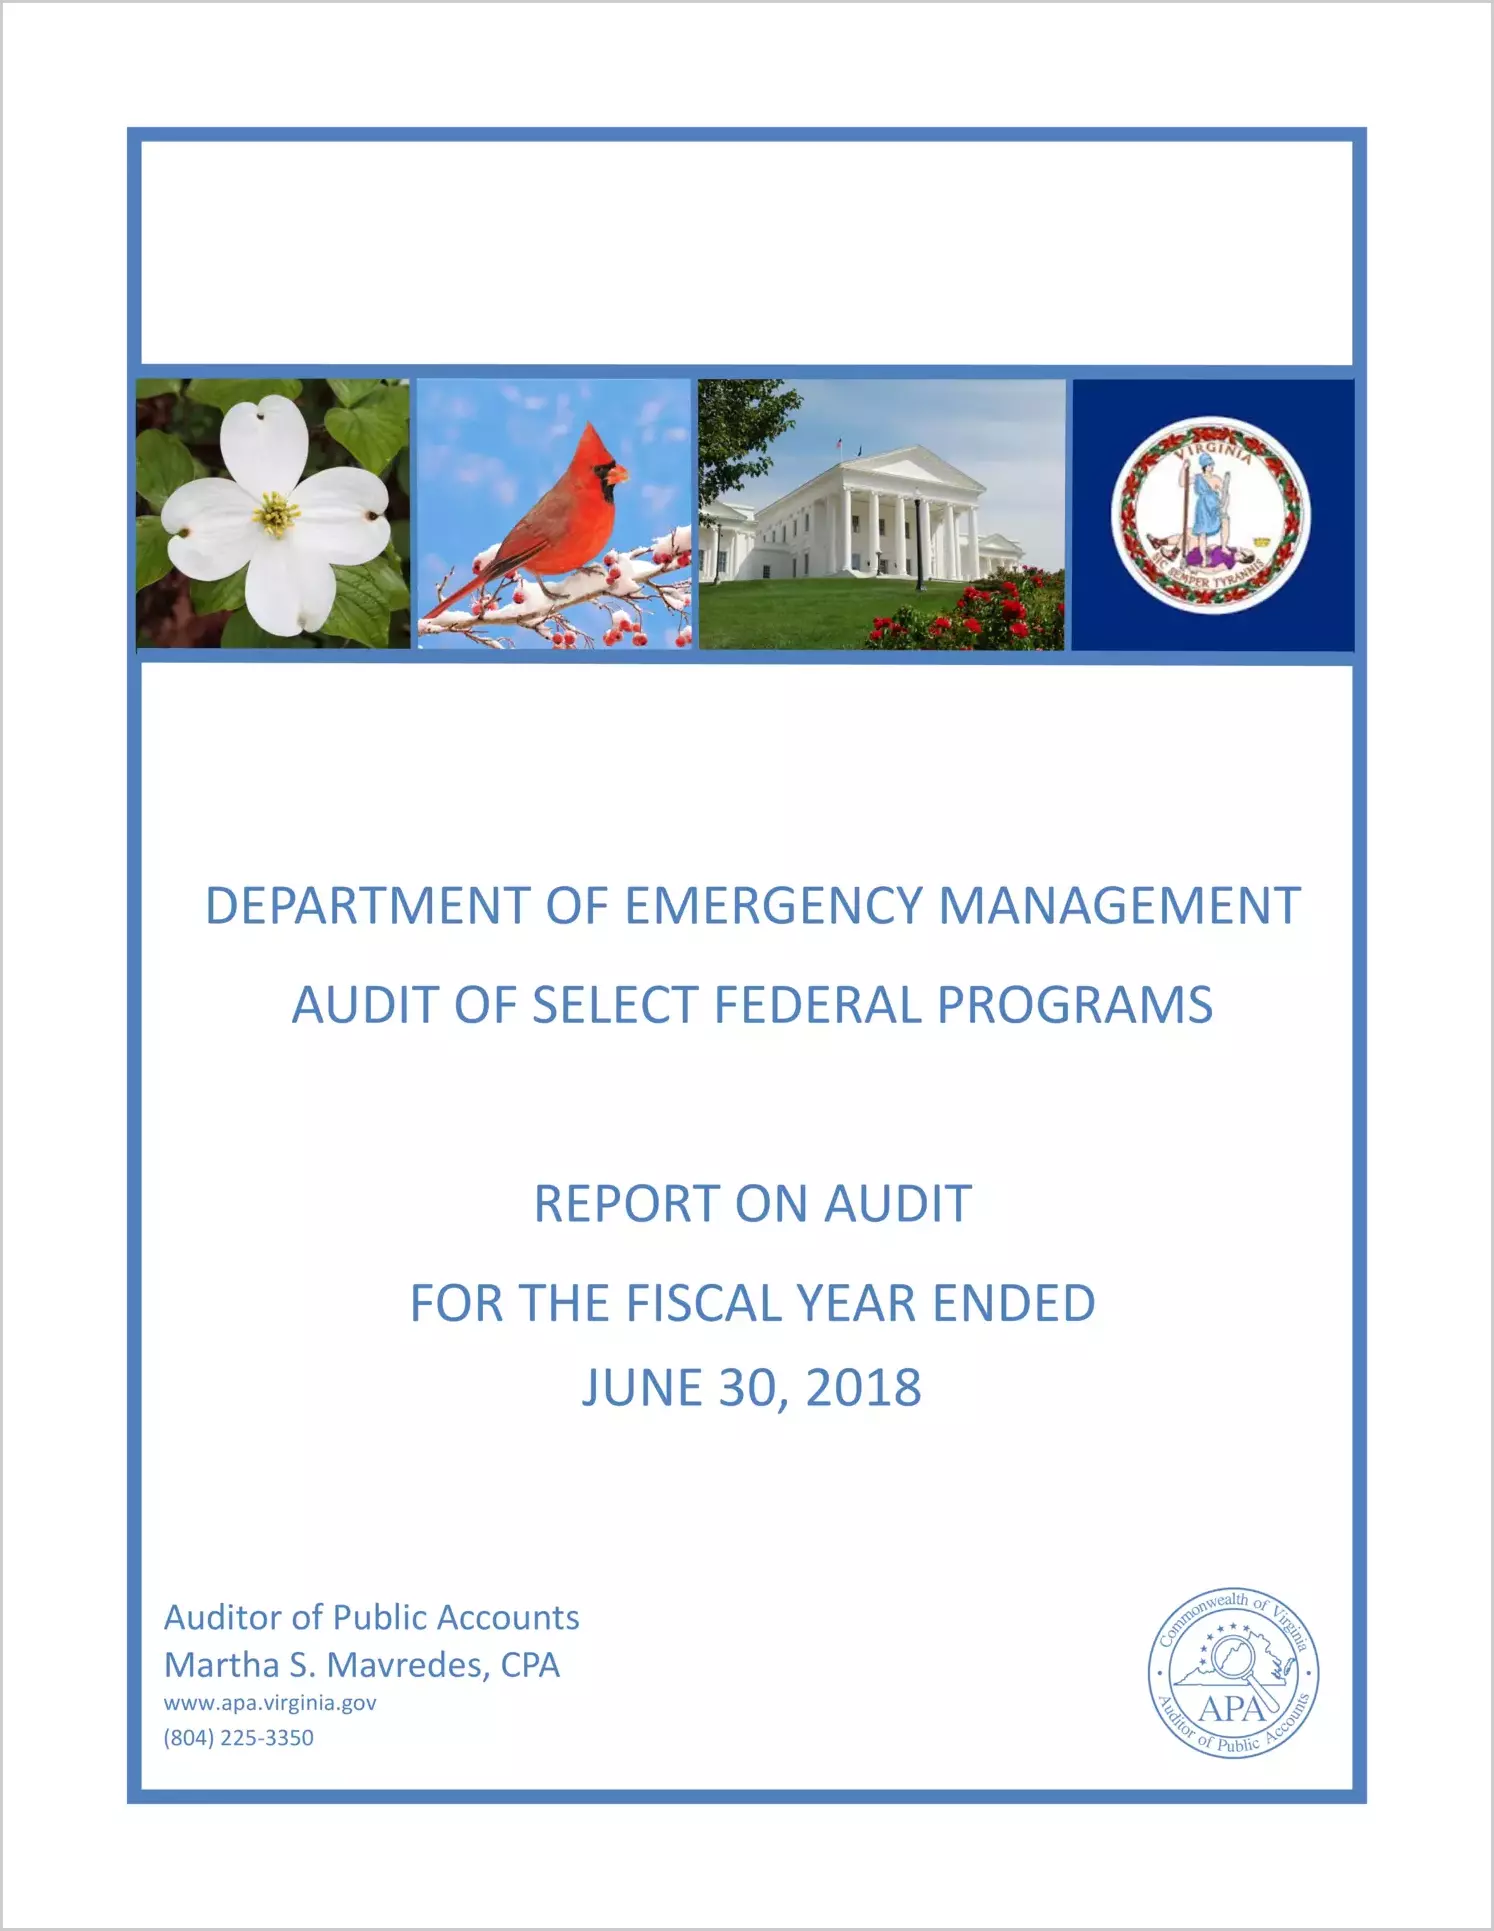 Department of Emergency Management Audit of Select Federal Programs for the fiscal year ended June 30, 2018